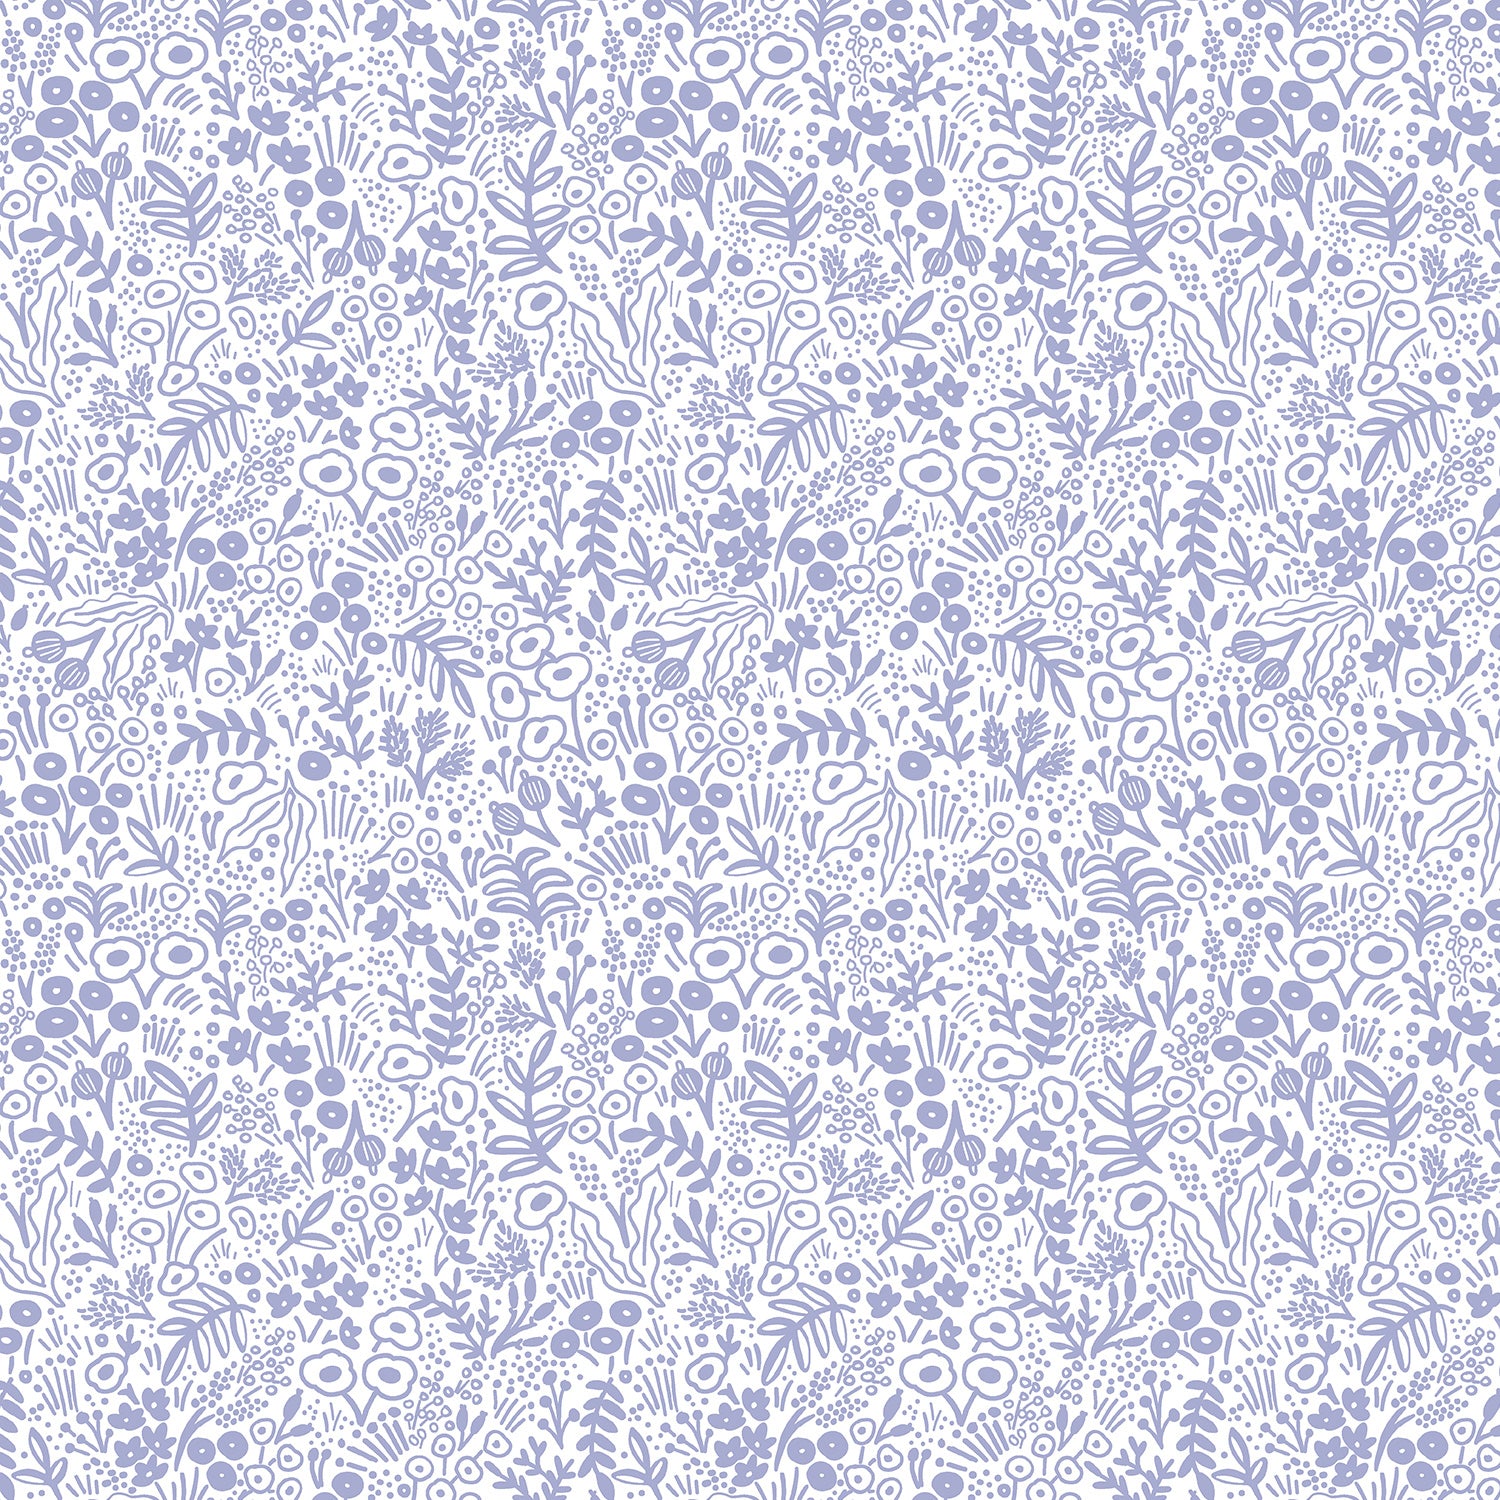 Rifle Paper Co. Basics - Tapestry Lace - Periwinkle